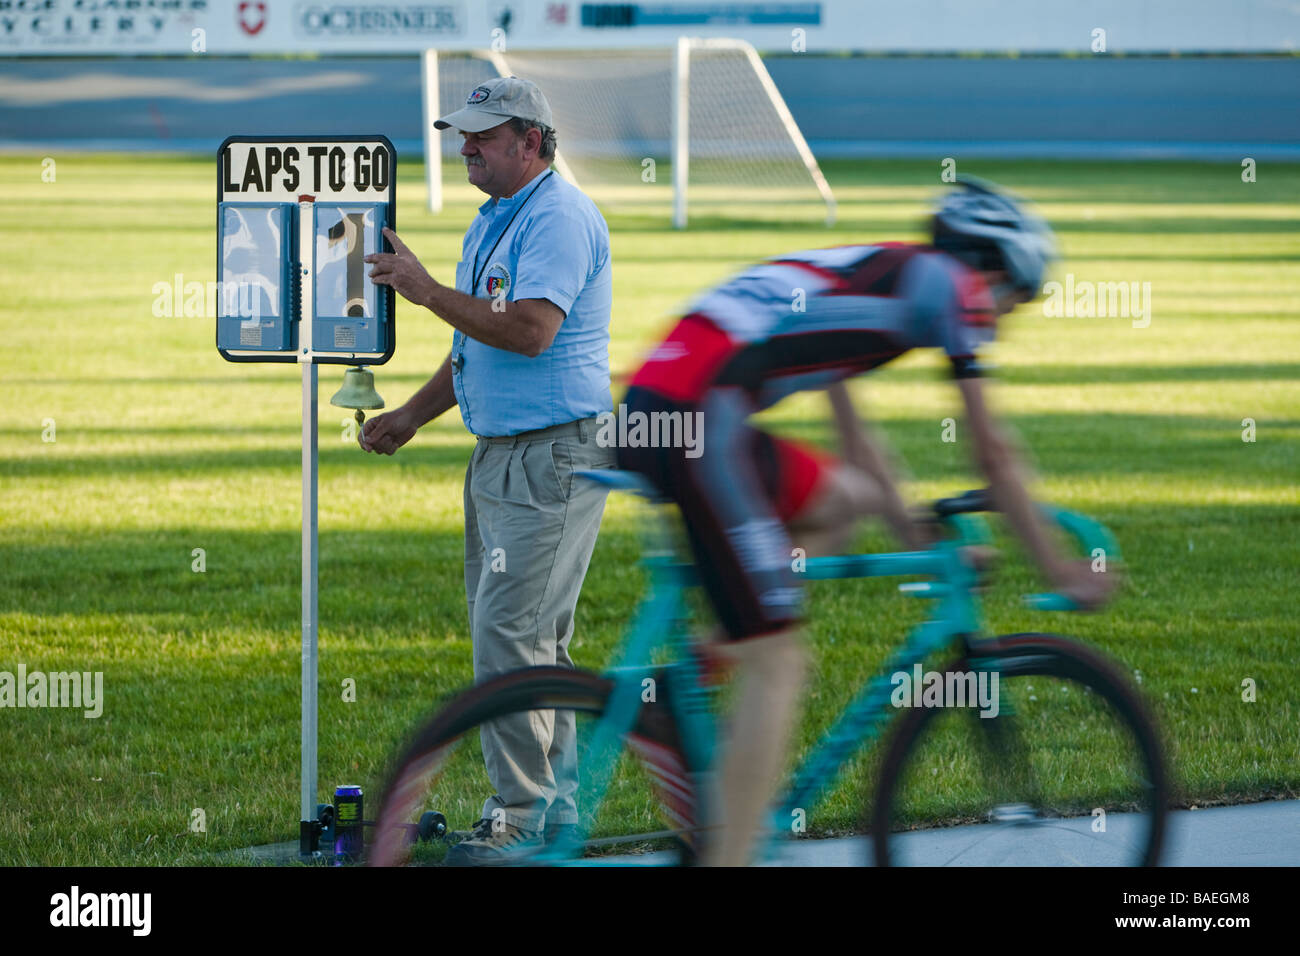 ILLINOIS Northbrook Race judge stand at laps to go sign at bicycle race at velodrome track Stock Photo